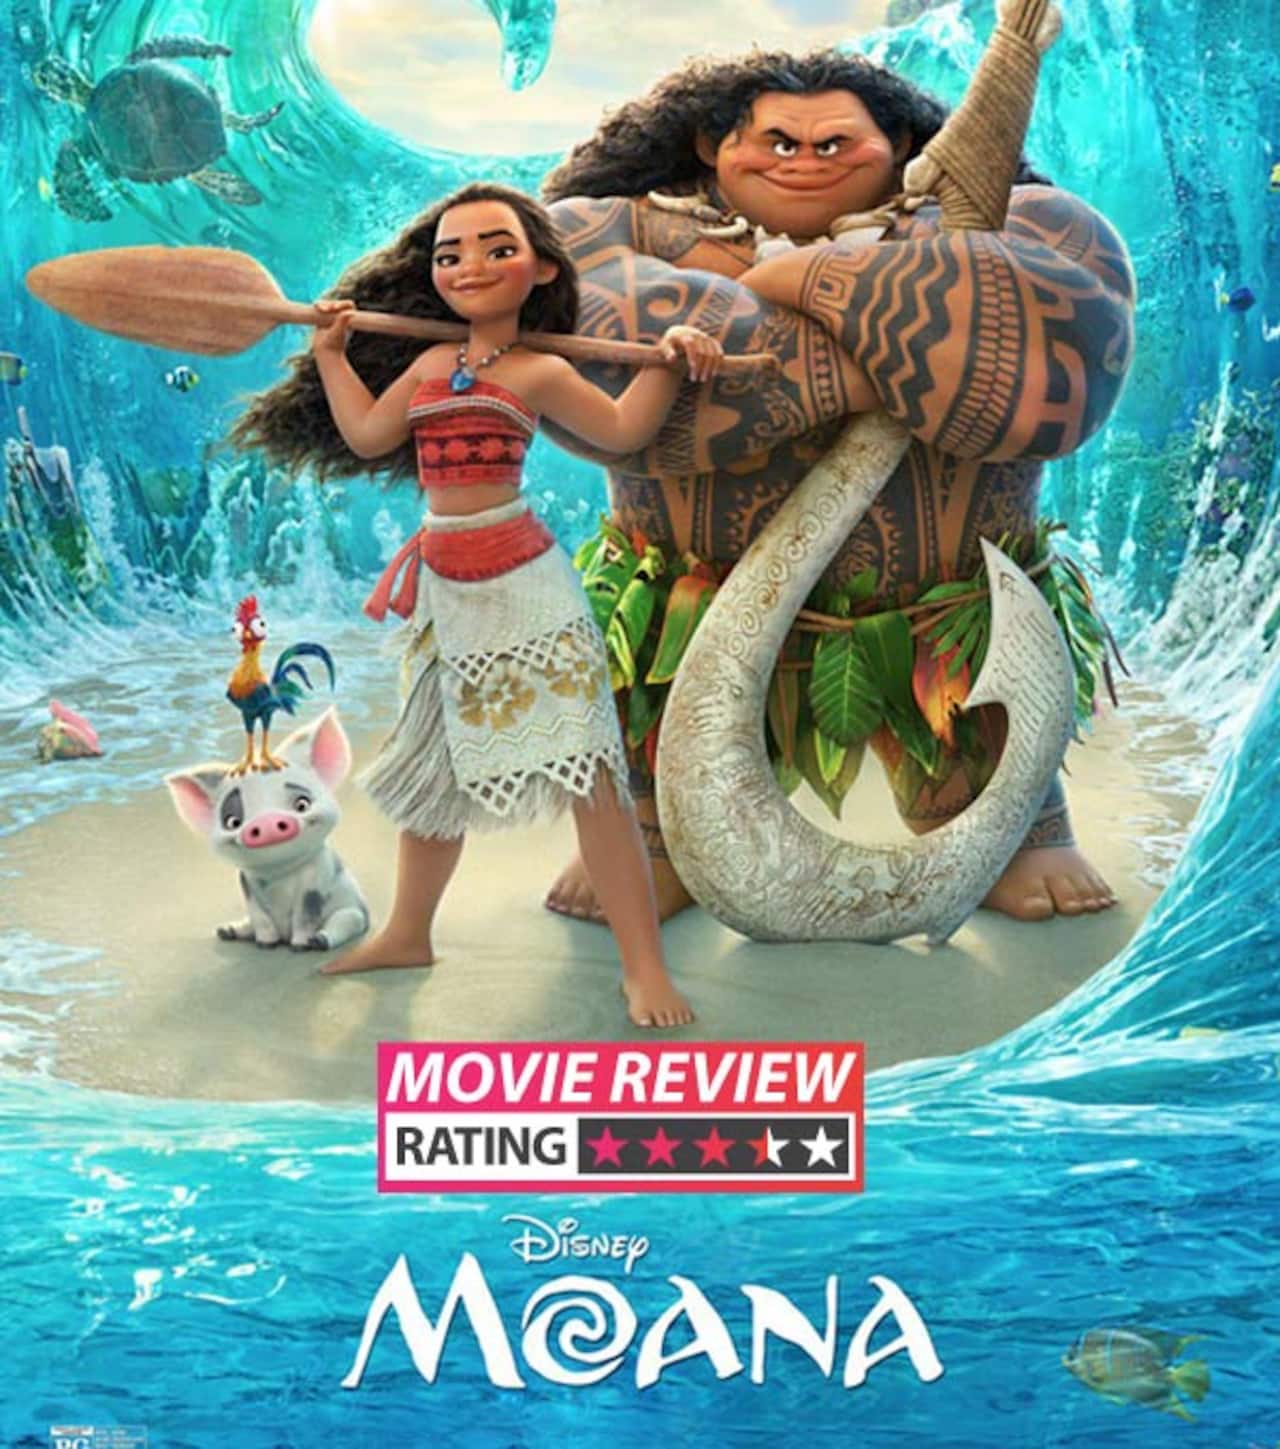 Moana movie review: Dwayne Johnson and the amazing visuals are the highlights of this musical entertainer